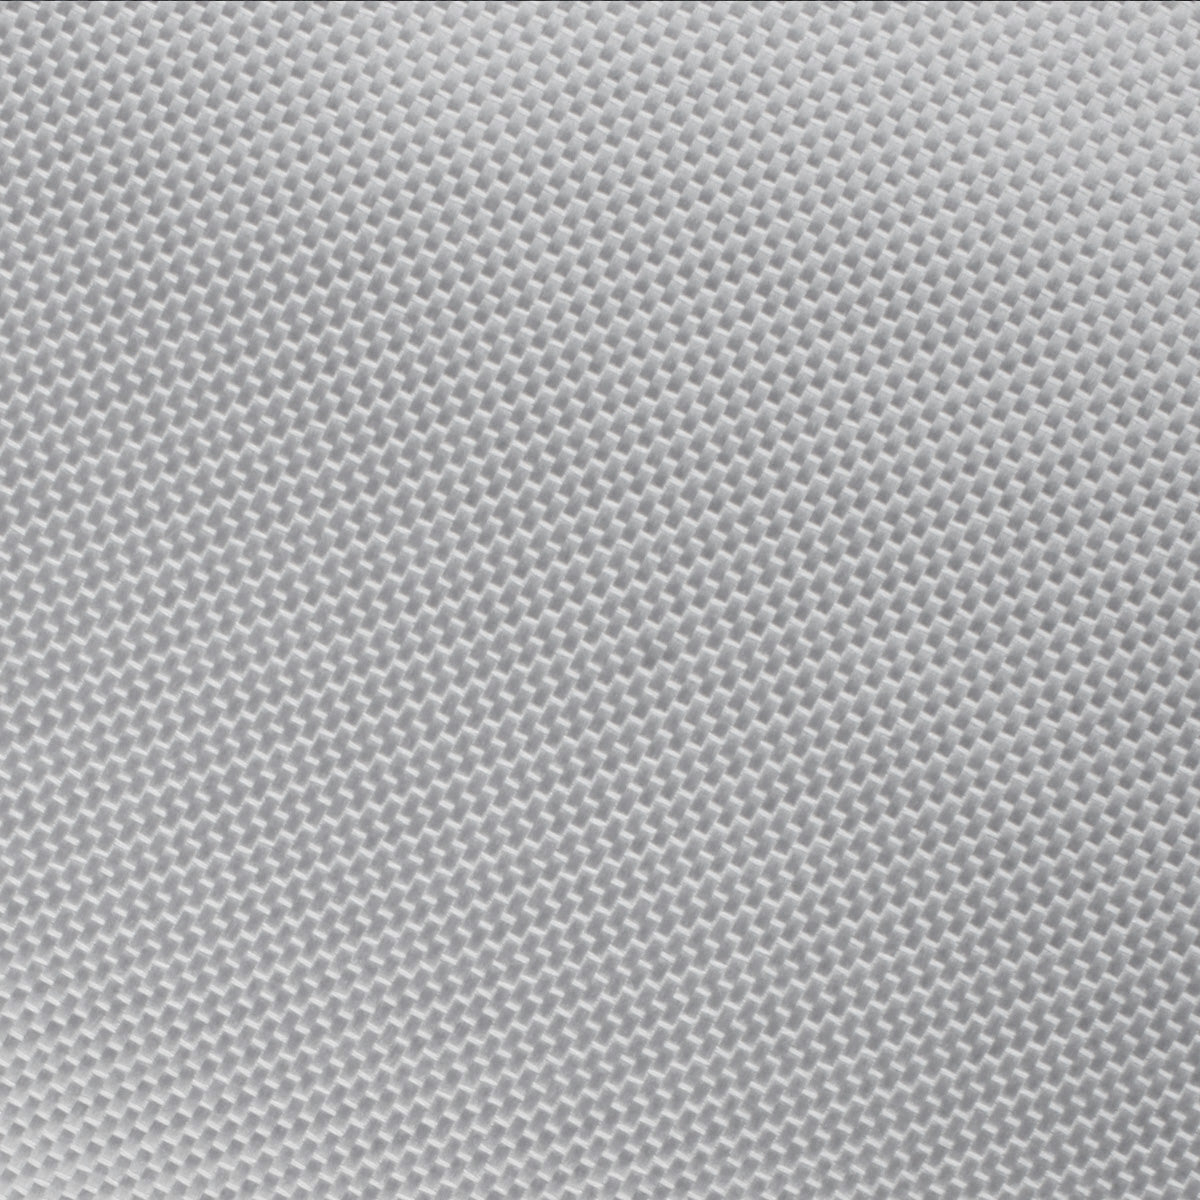 Rustic Light Gray Oxford Weave Fabric Swatch